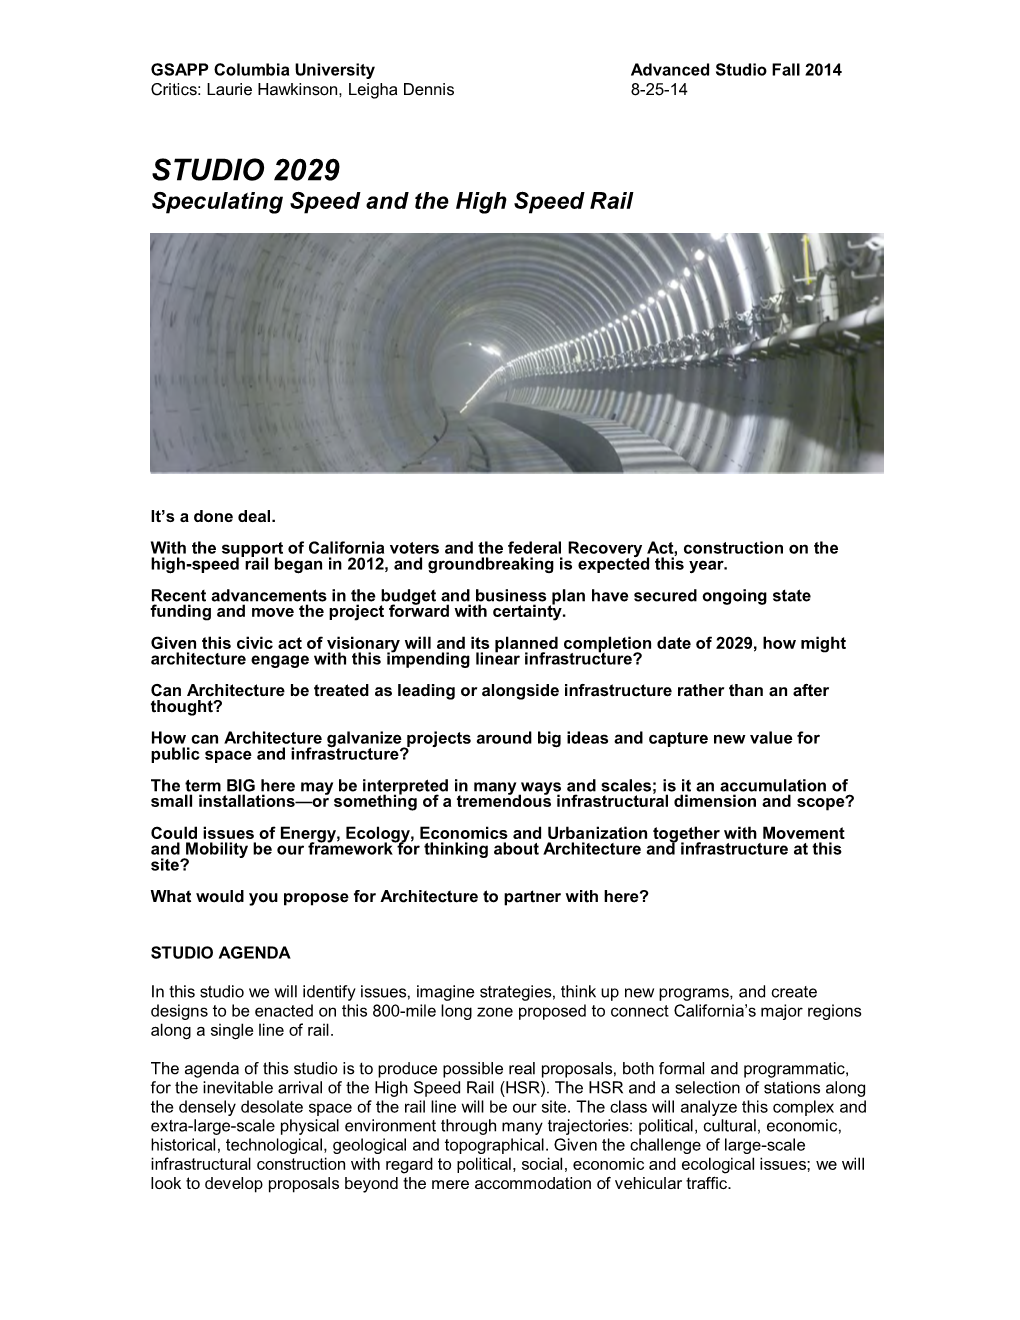 STUDIO 2029 Speculating Speed and the High Speed Rail